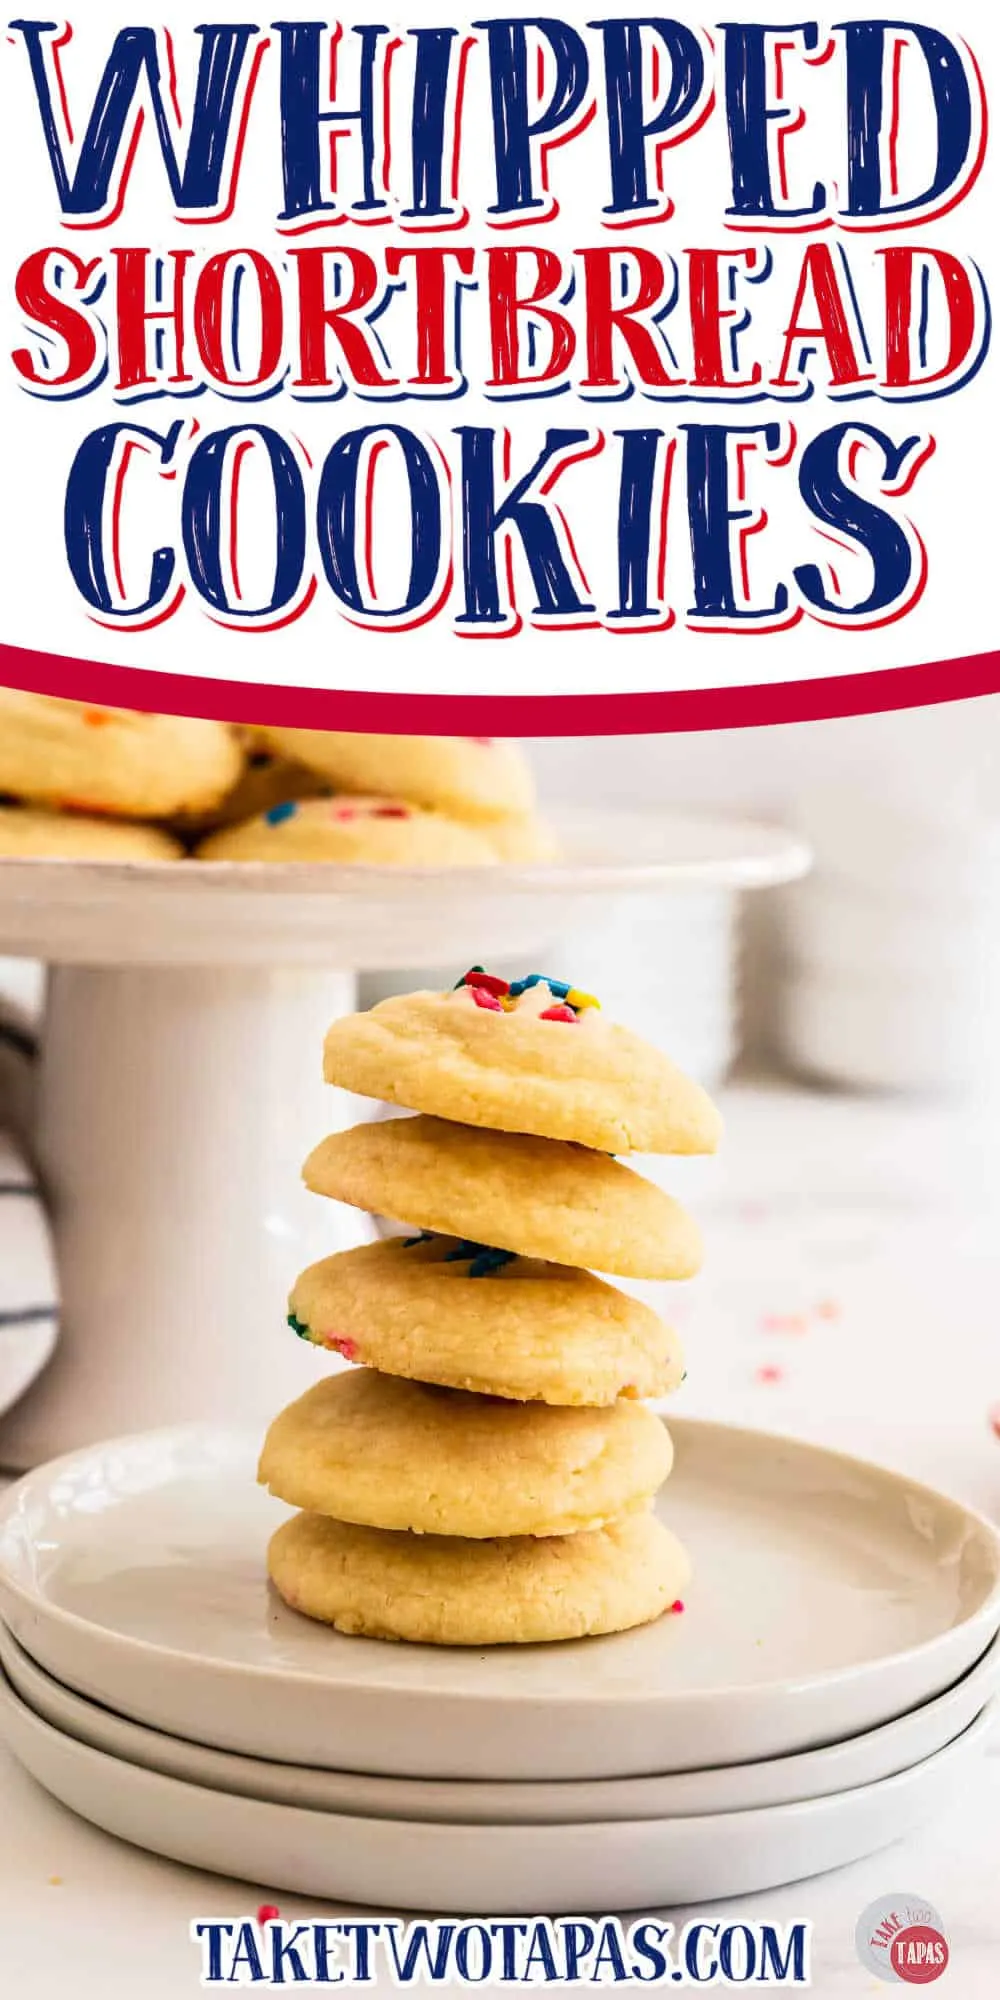 stack of cookies with text "whipped shortbread cookies"